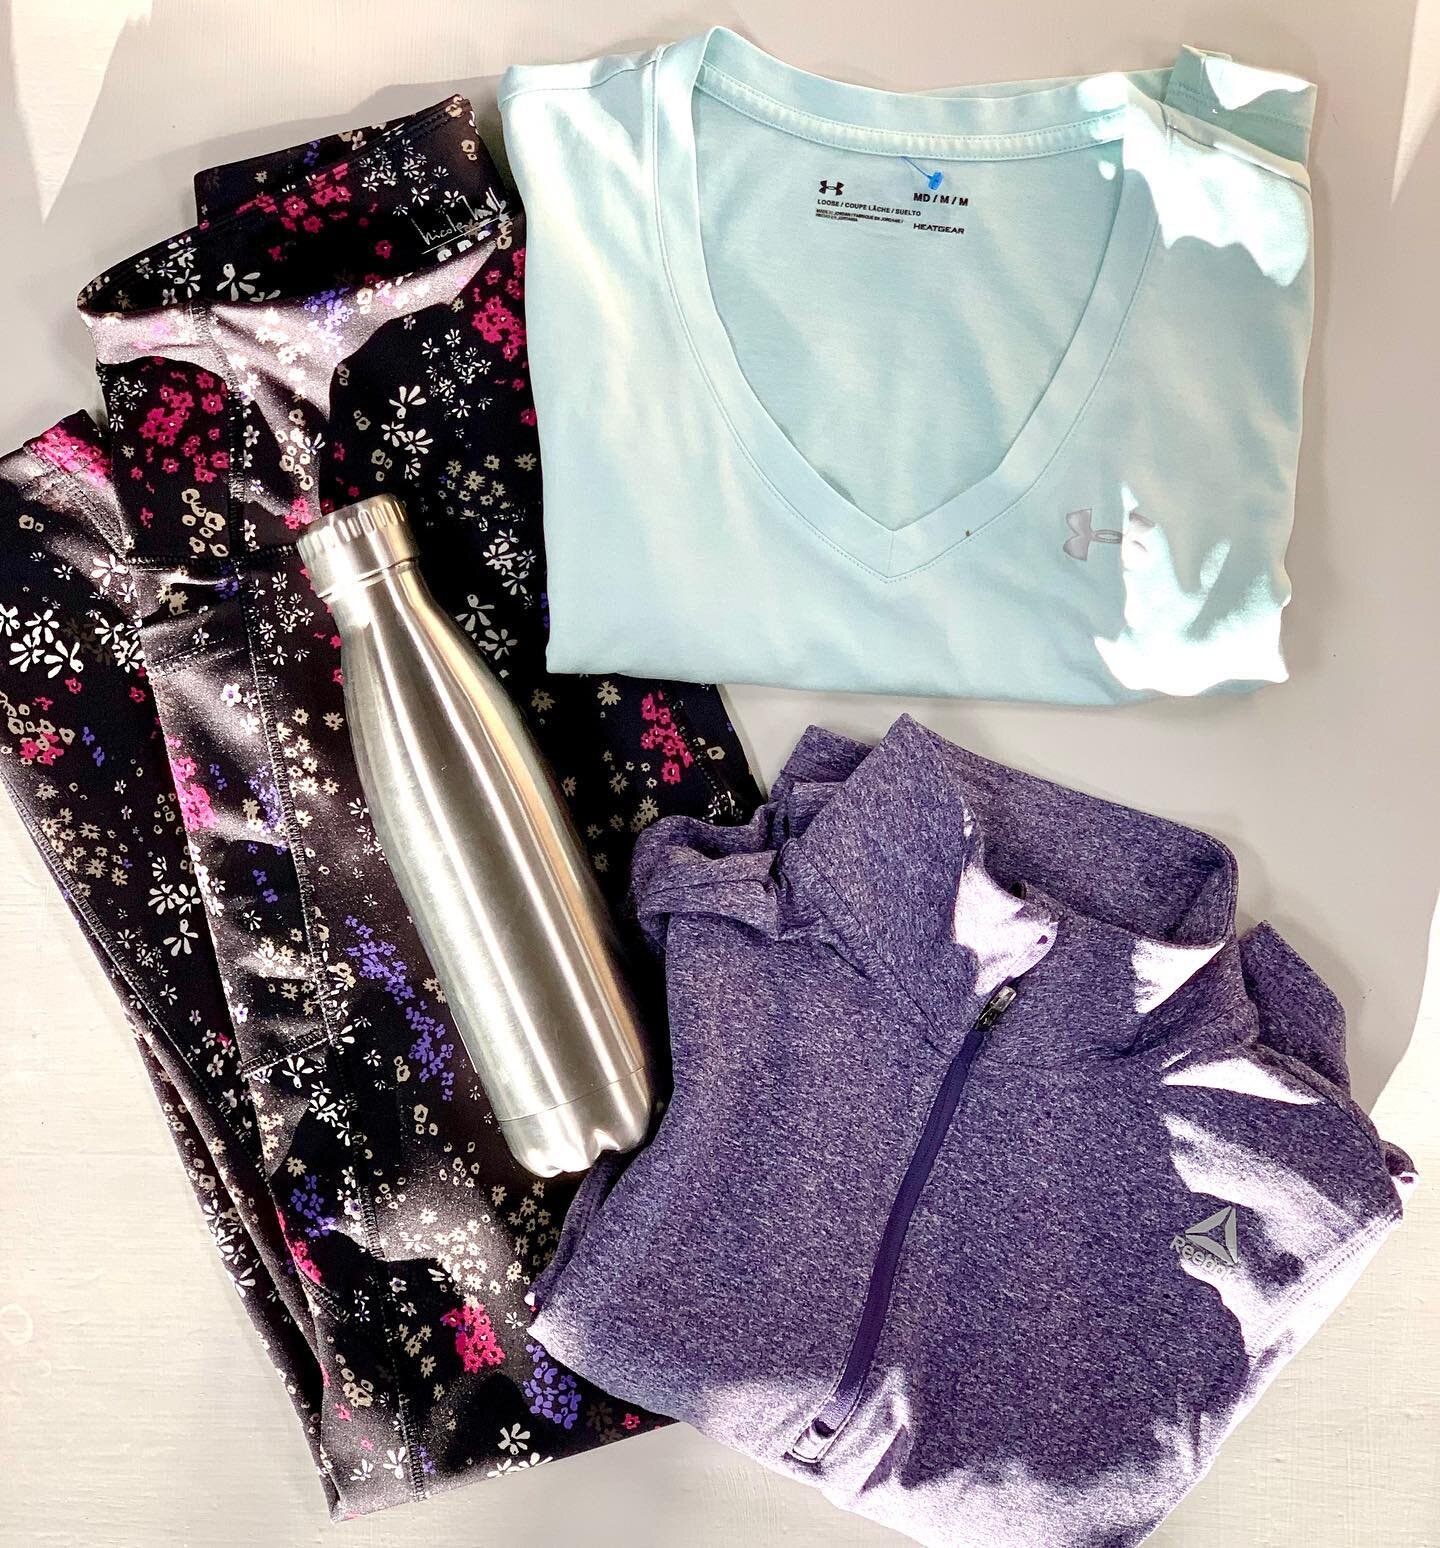 Athletic wear &amp; tennis shoes are 50% off this week! 

✨Under Armour shirt, M, $3.99
✨Quarter Zip, XS, $4.99
✨Floral leggings, M, $3.99
✨Water bottle, $1.99

#thriftstorefinds #thrift #thrifting #thrifthaul #thrifted #nonprofit #nonprofitorganizat